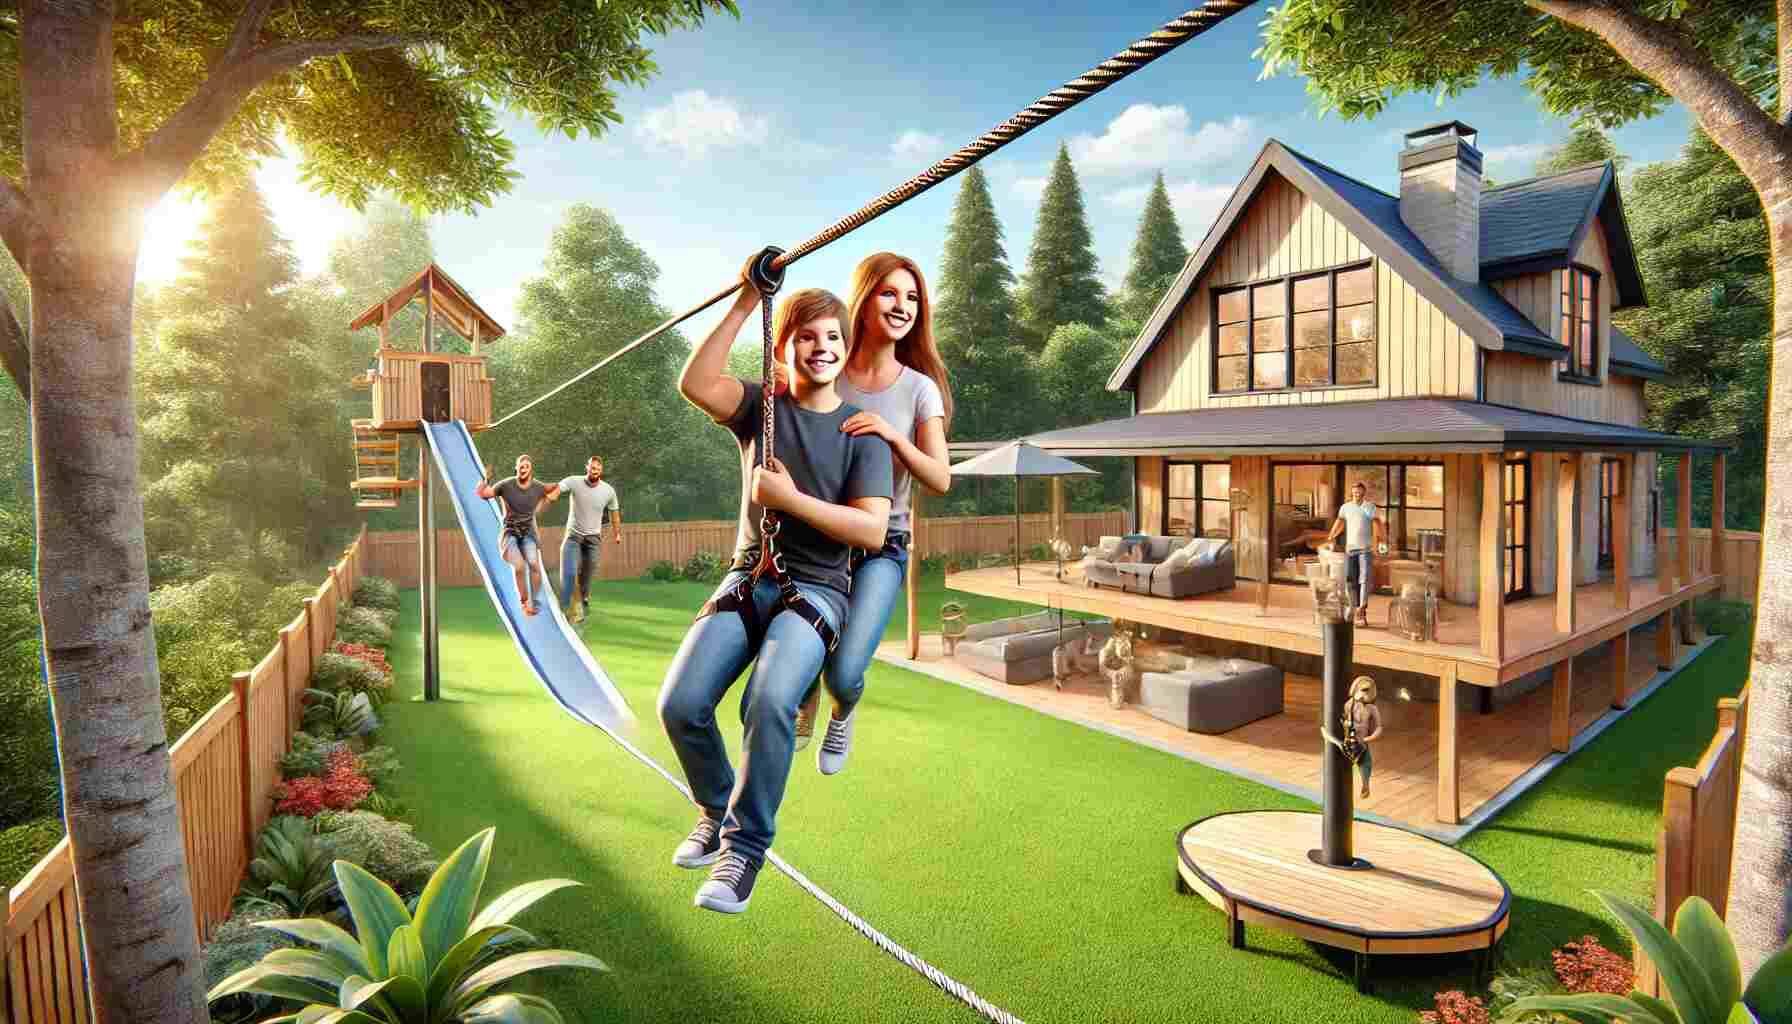 A backyard with a professionally installed zipline, featuring a happy family enjoying a ride. The background includes trees, a green lawn, and a clear sky, showcasing the excitement of ziplining at home.